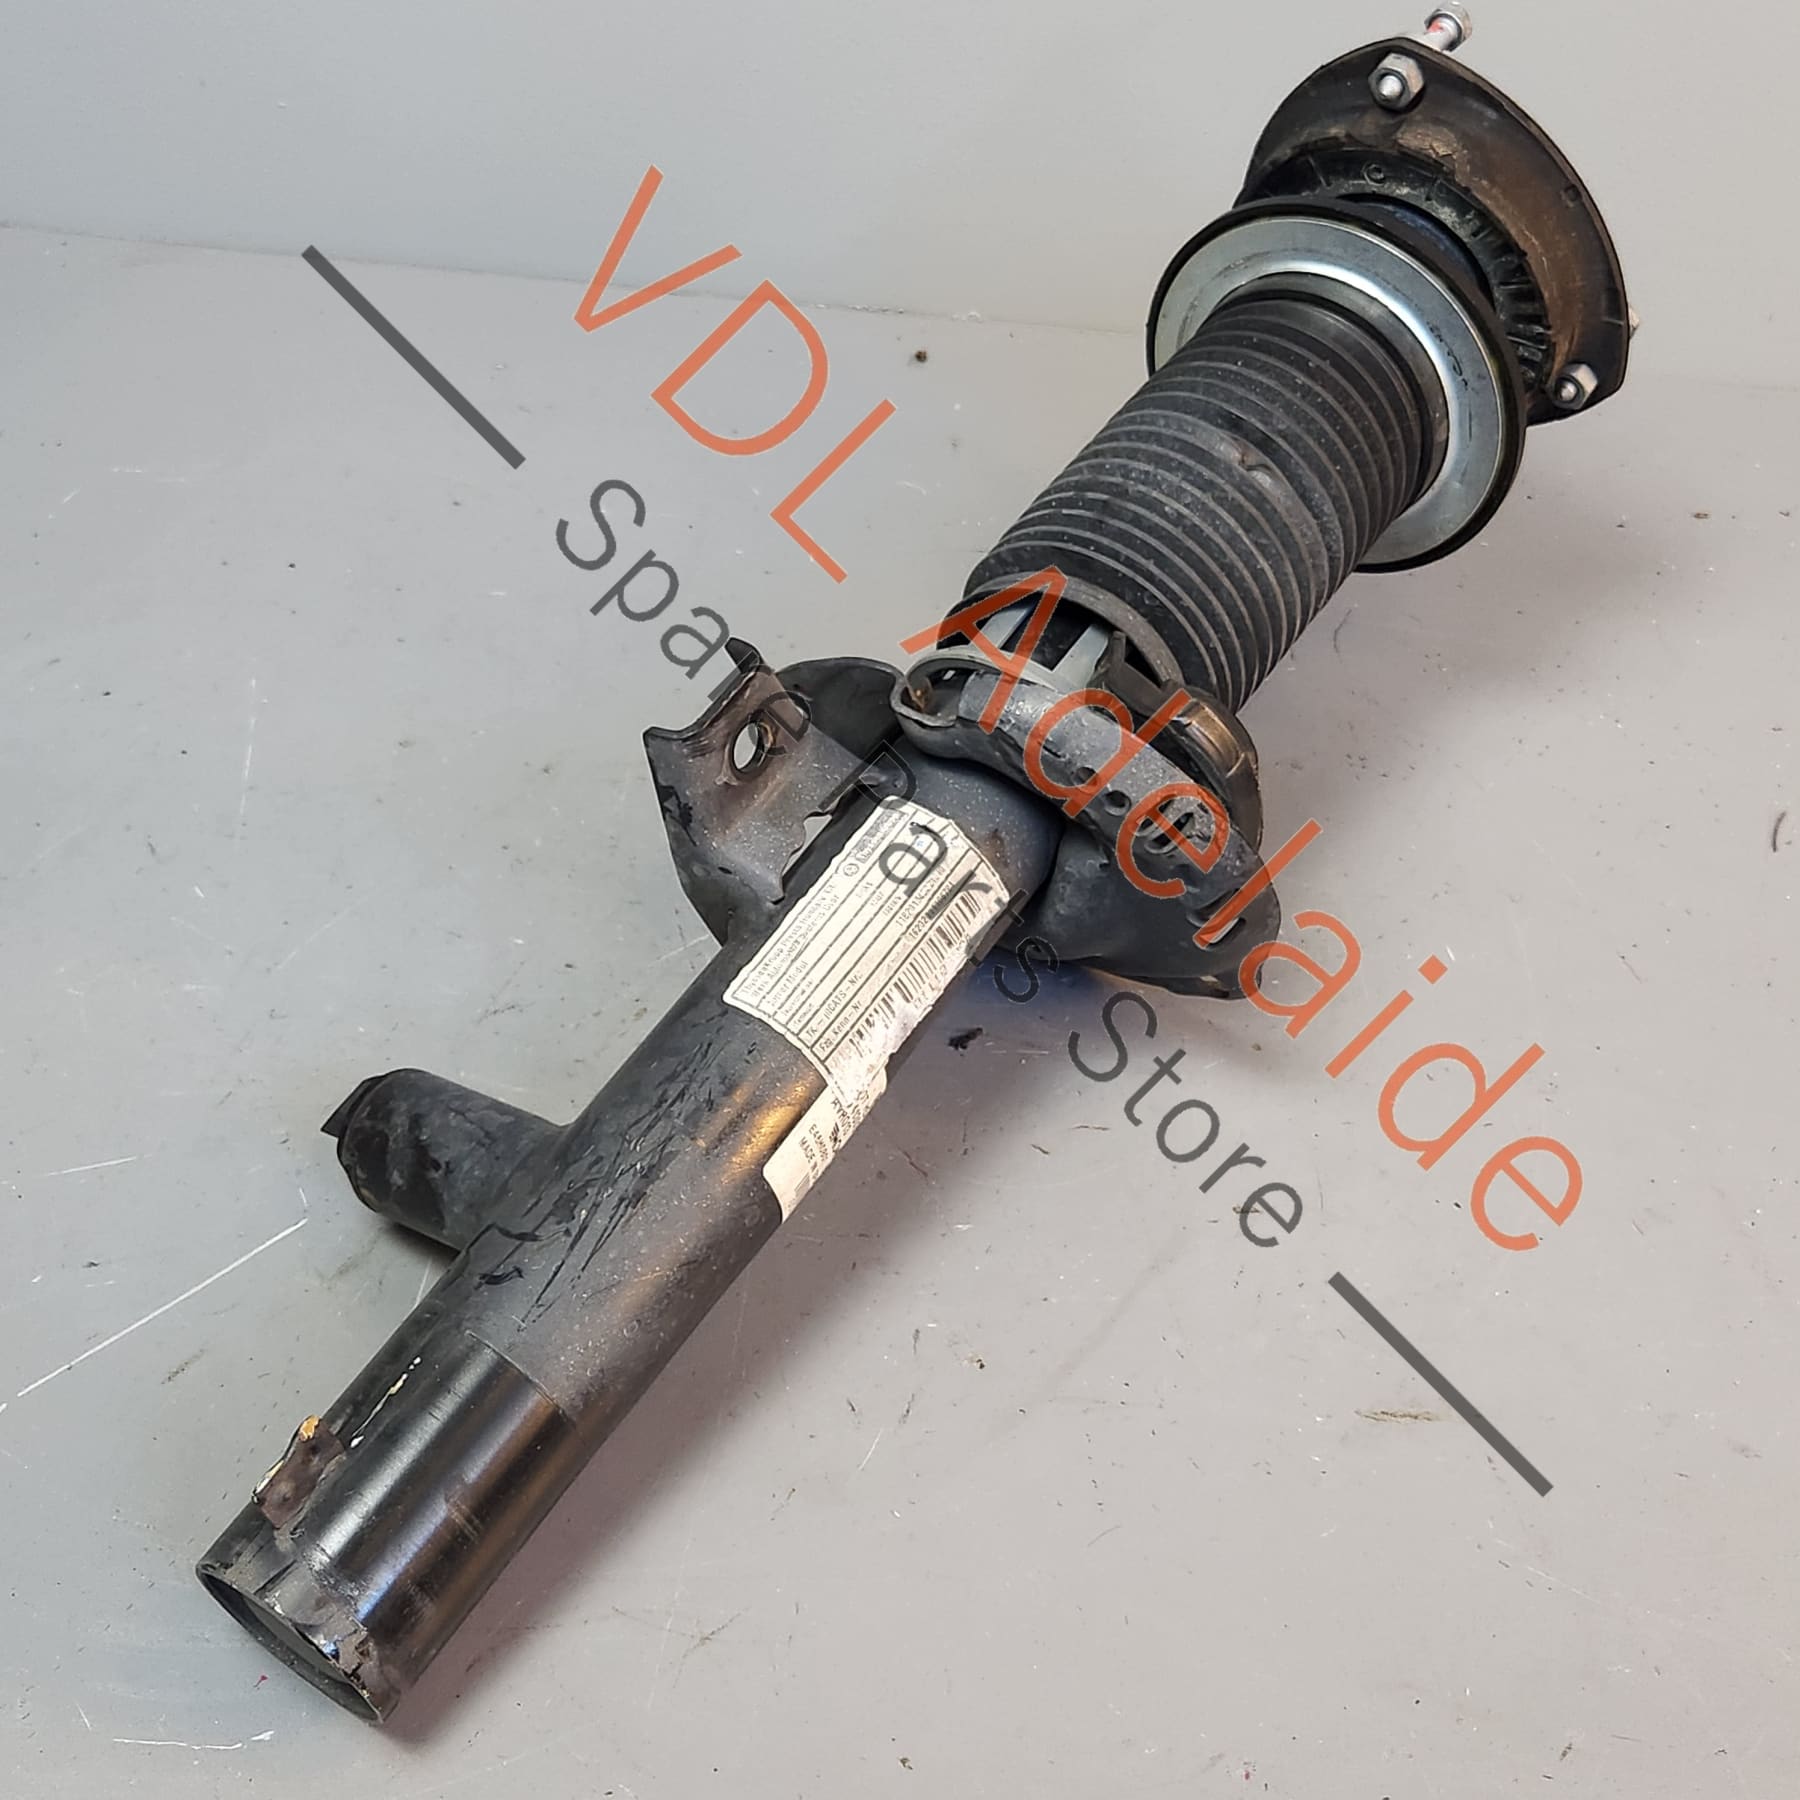 83A413031    Audi RSQ3 F3 Front DCC Active Damper Electronic Shock Absorber 83A413031